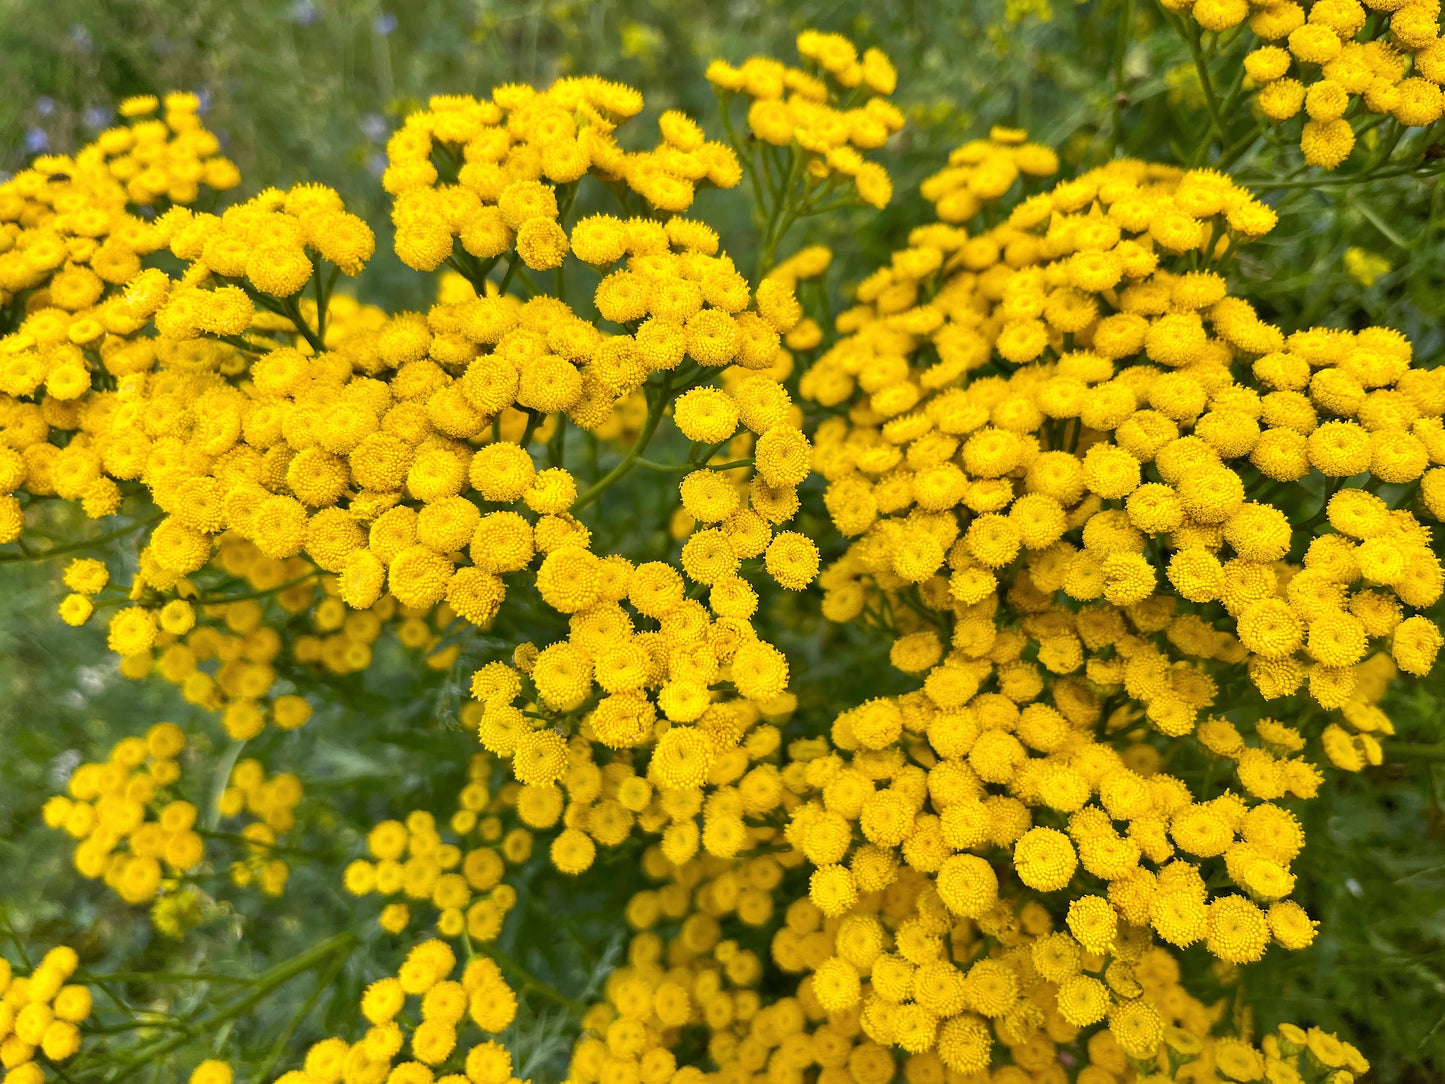 100 YELLOW TANSY Double Golden Buttons Fern Leaf Tanacetum Vulgare Flower Seeds